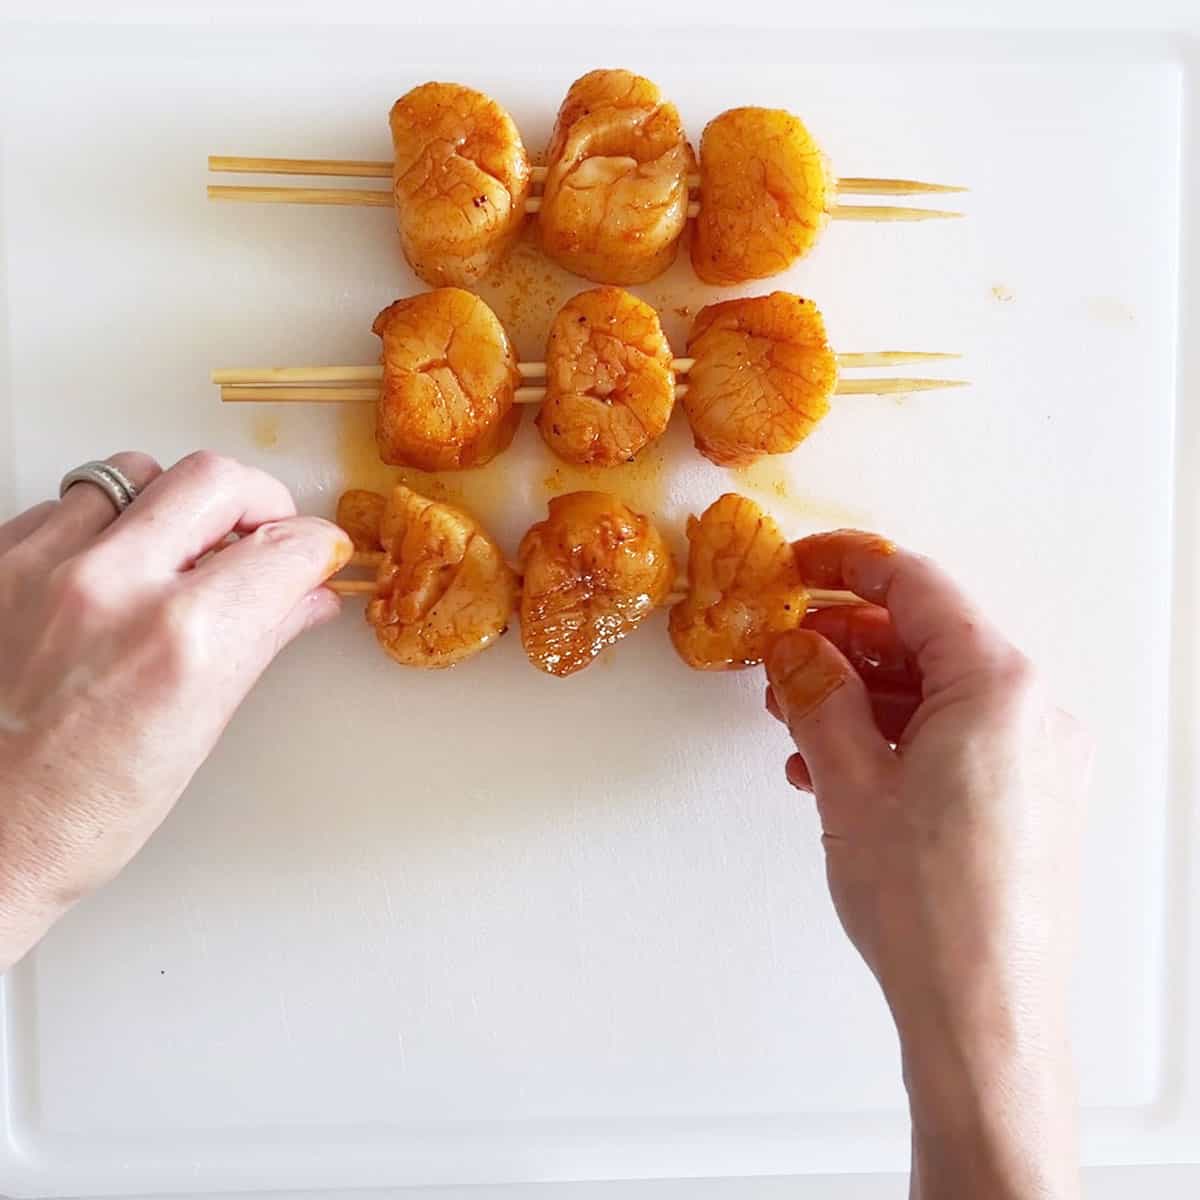 Threading the scallops onto skewers. 